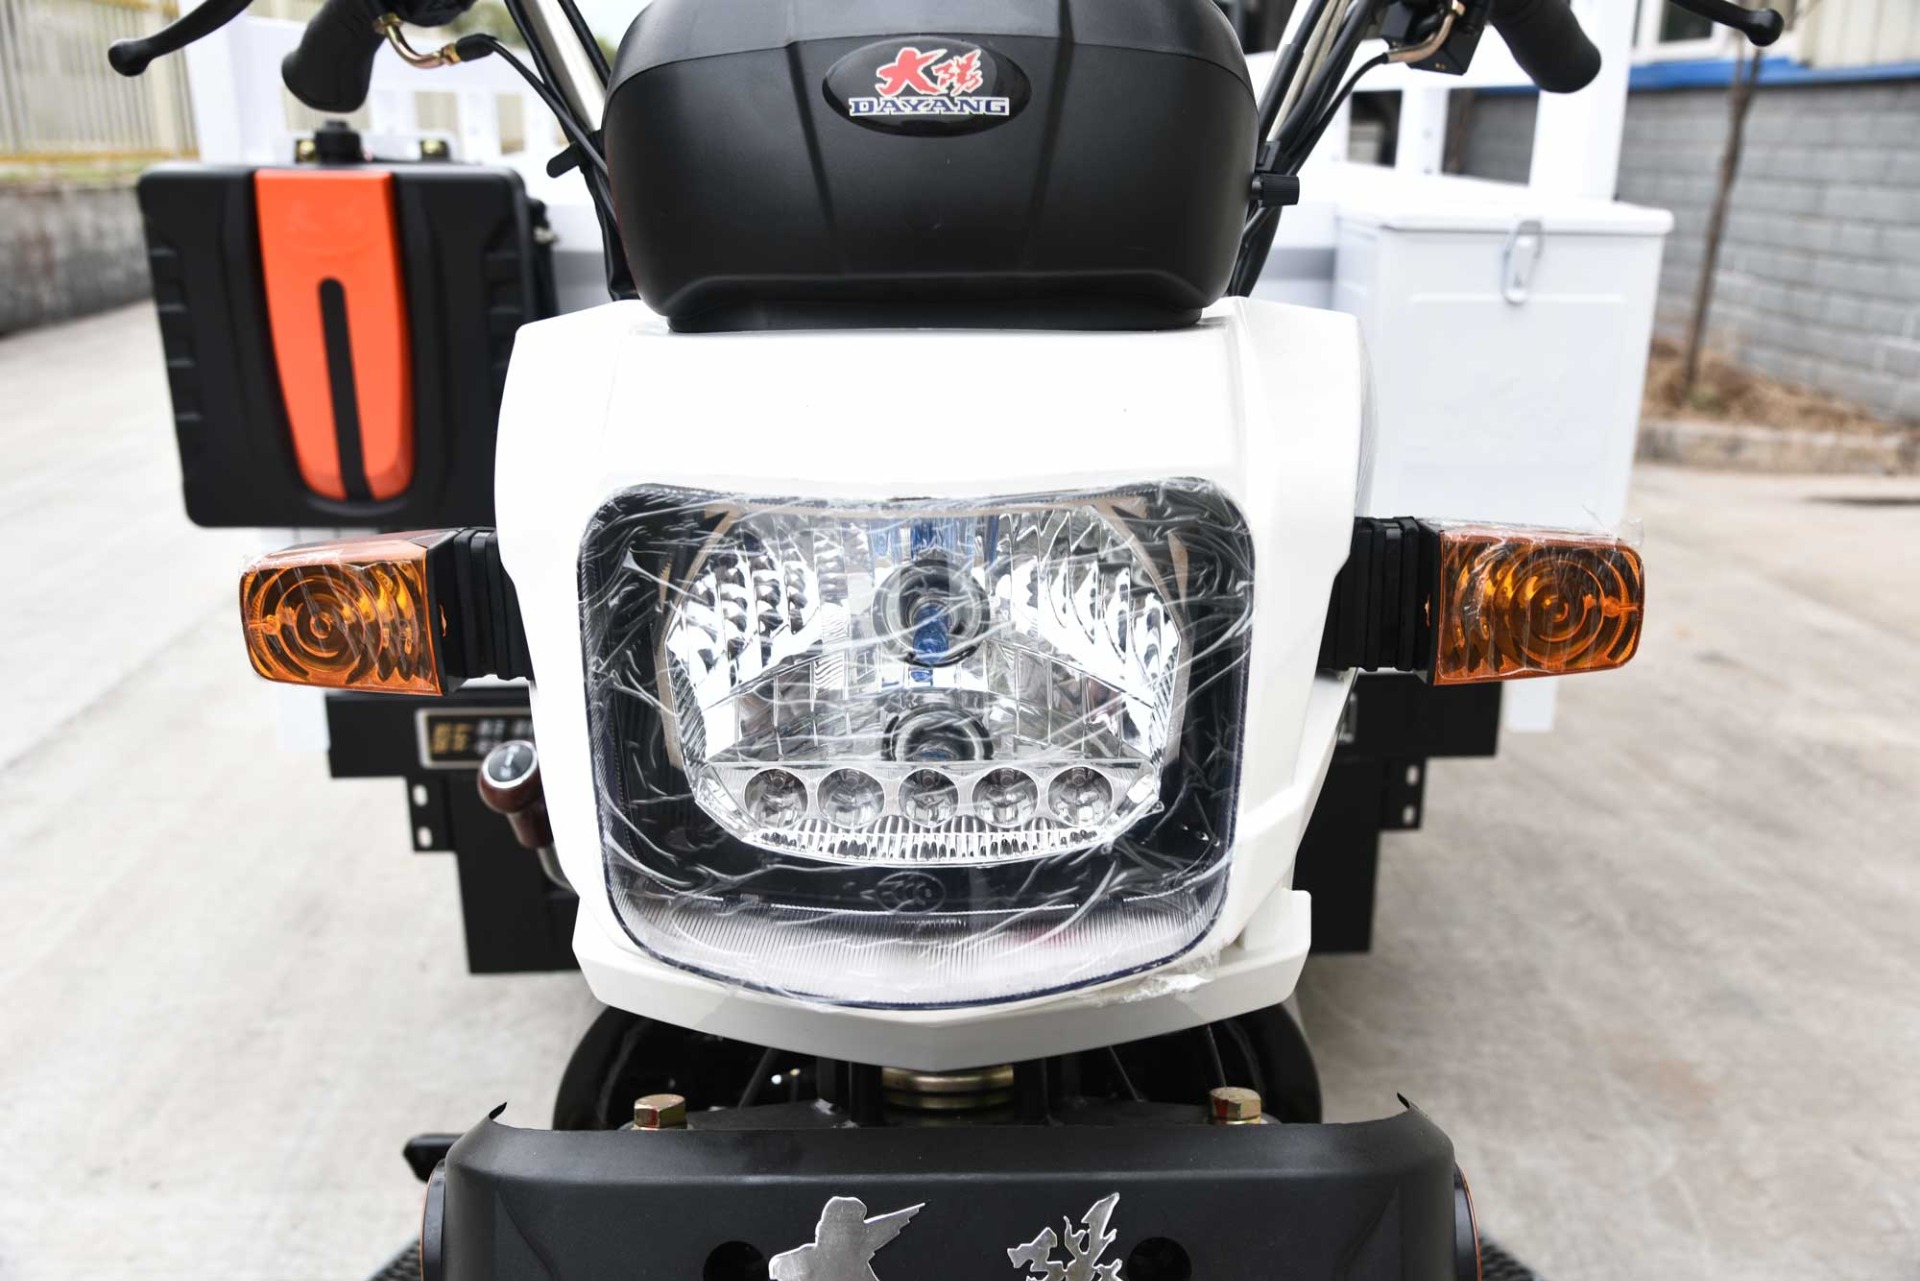 DY5-4 350cc high Power motor Cargo Tricycles